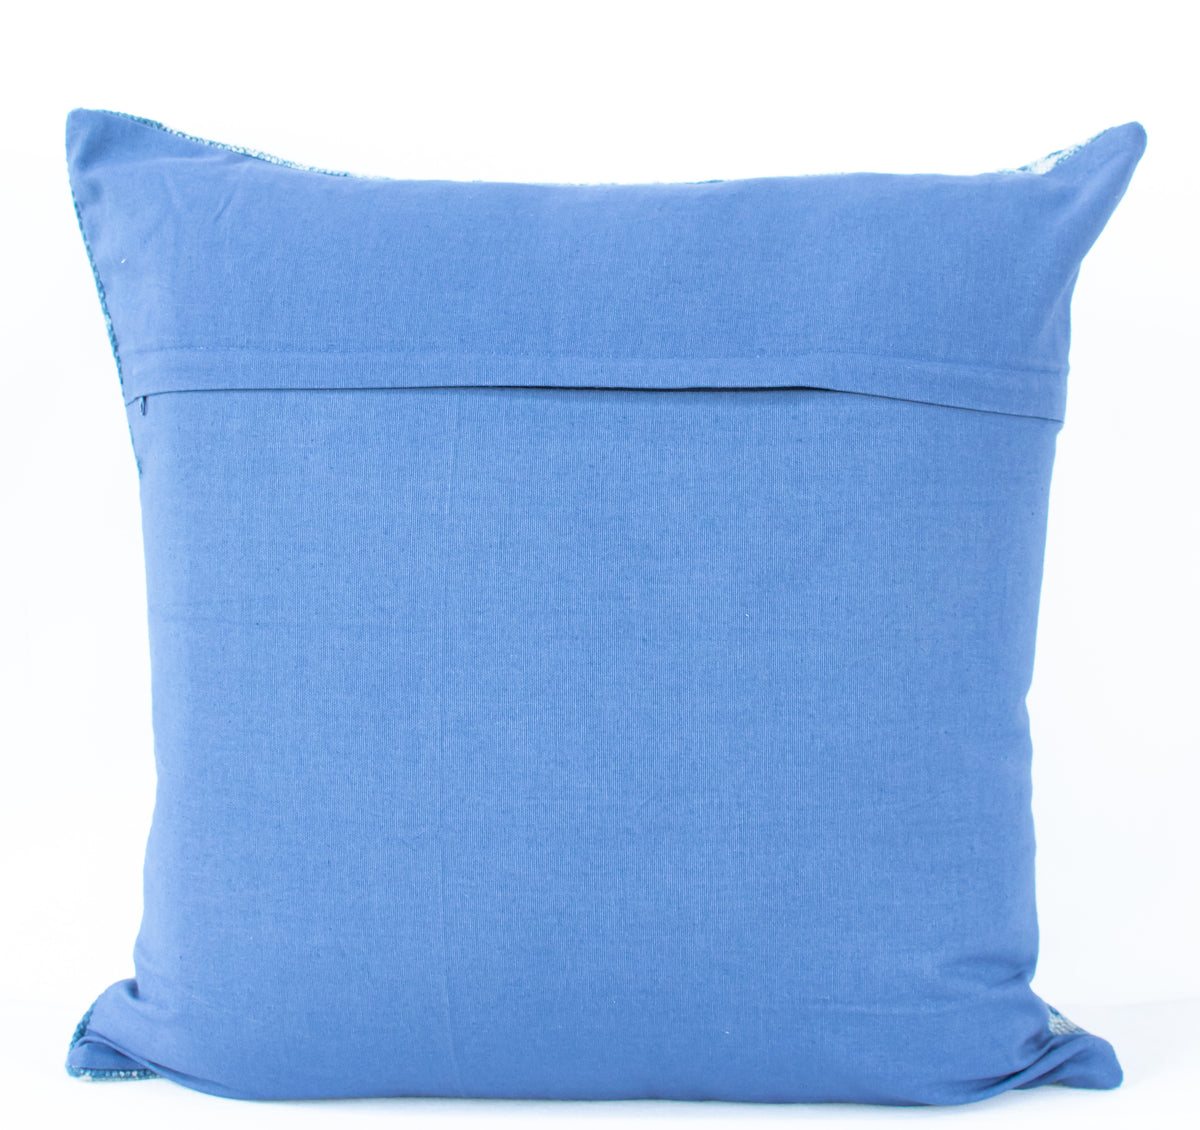 Droplets Cushion Cover